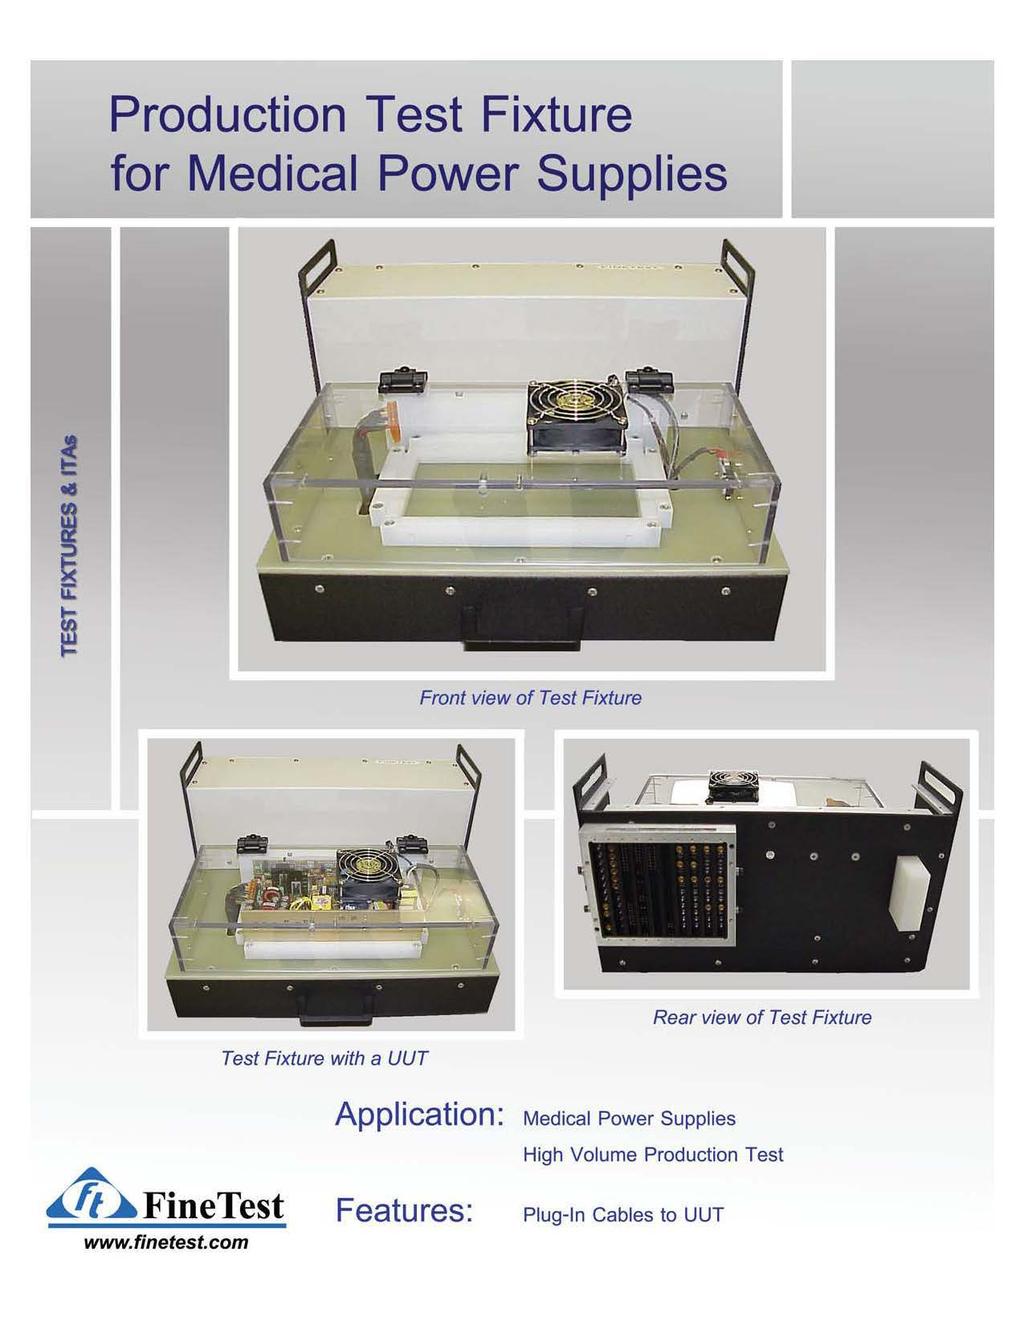 Production Test Fixture for Medical Power Supplies!